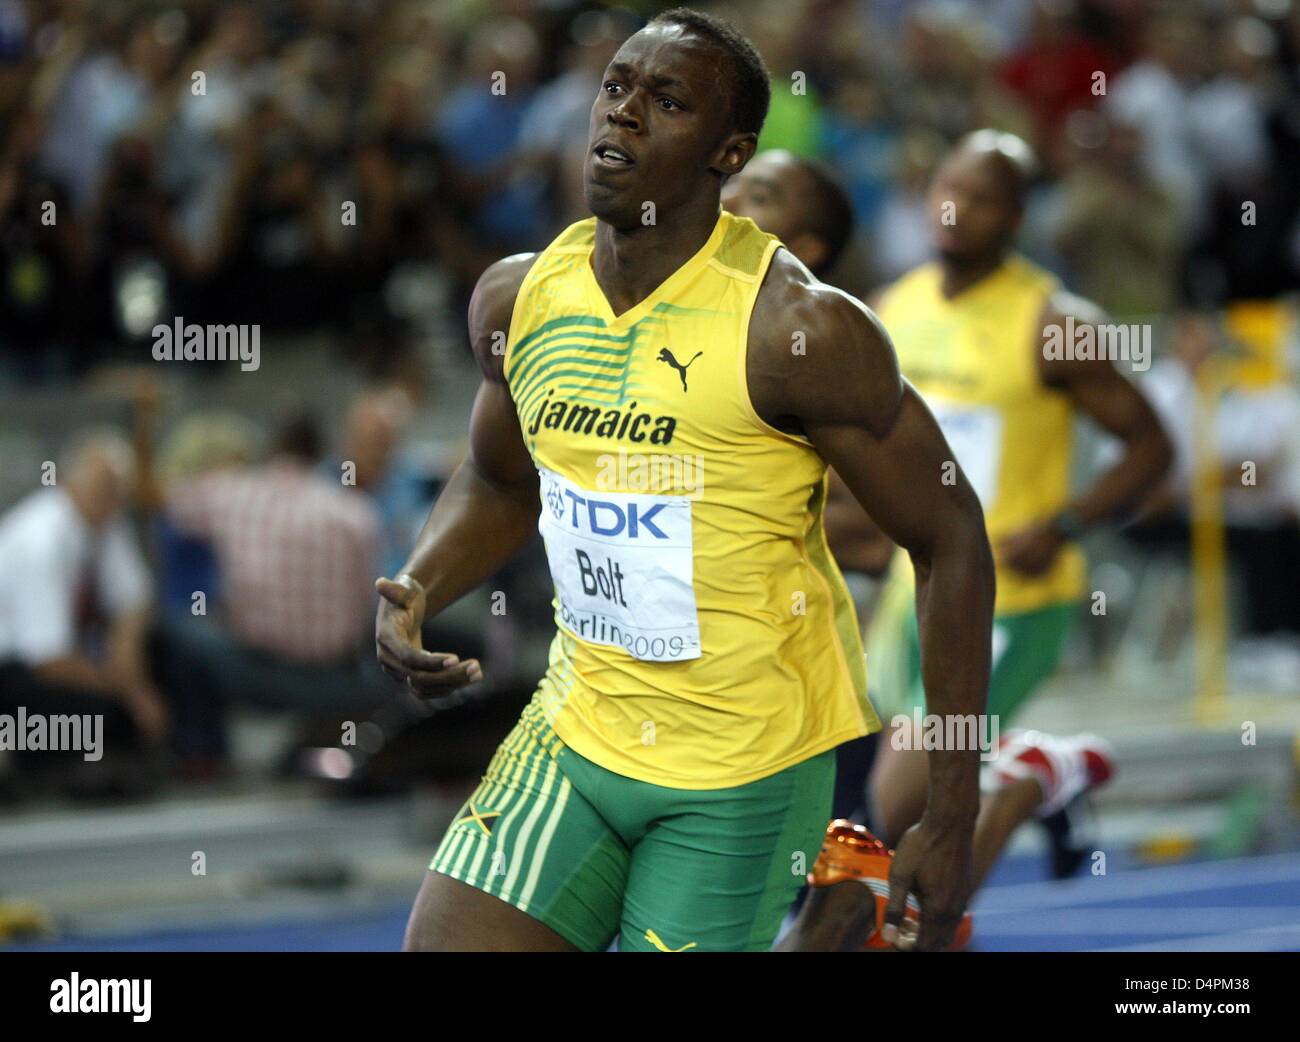 Jamaican Usain Bolt wins the men?s 100m final at the 12th IAAF World Championships in Athletics in Berlin, Germany, 16 August 2009. Bolt established a new world record of 9.58 seconds. Photo: KAY NIETFELD Stock Photo